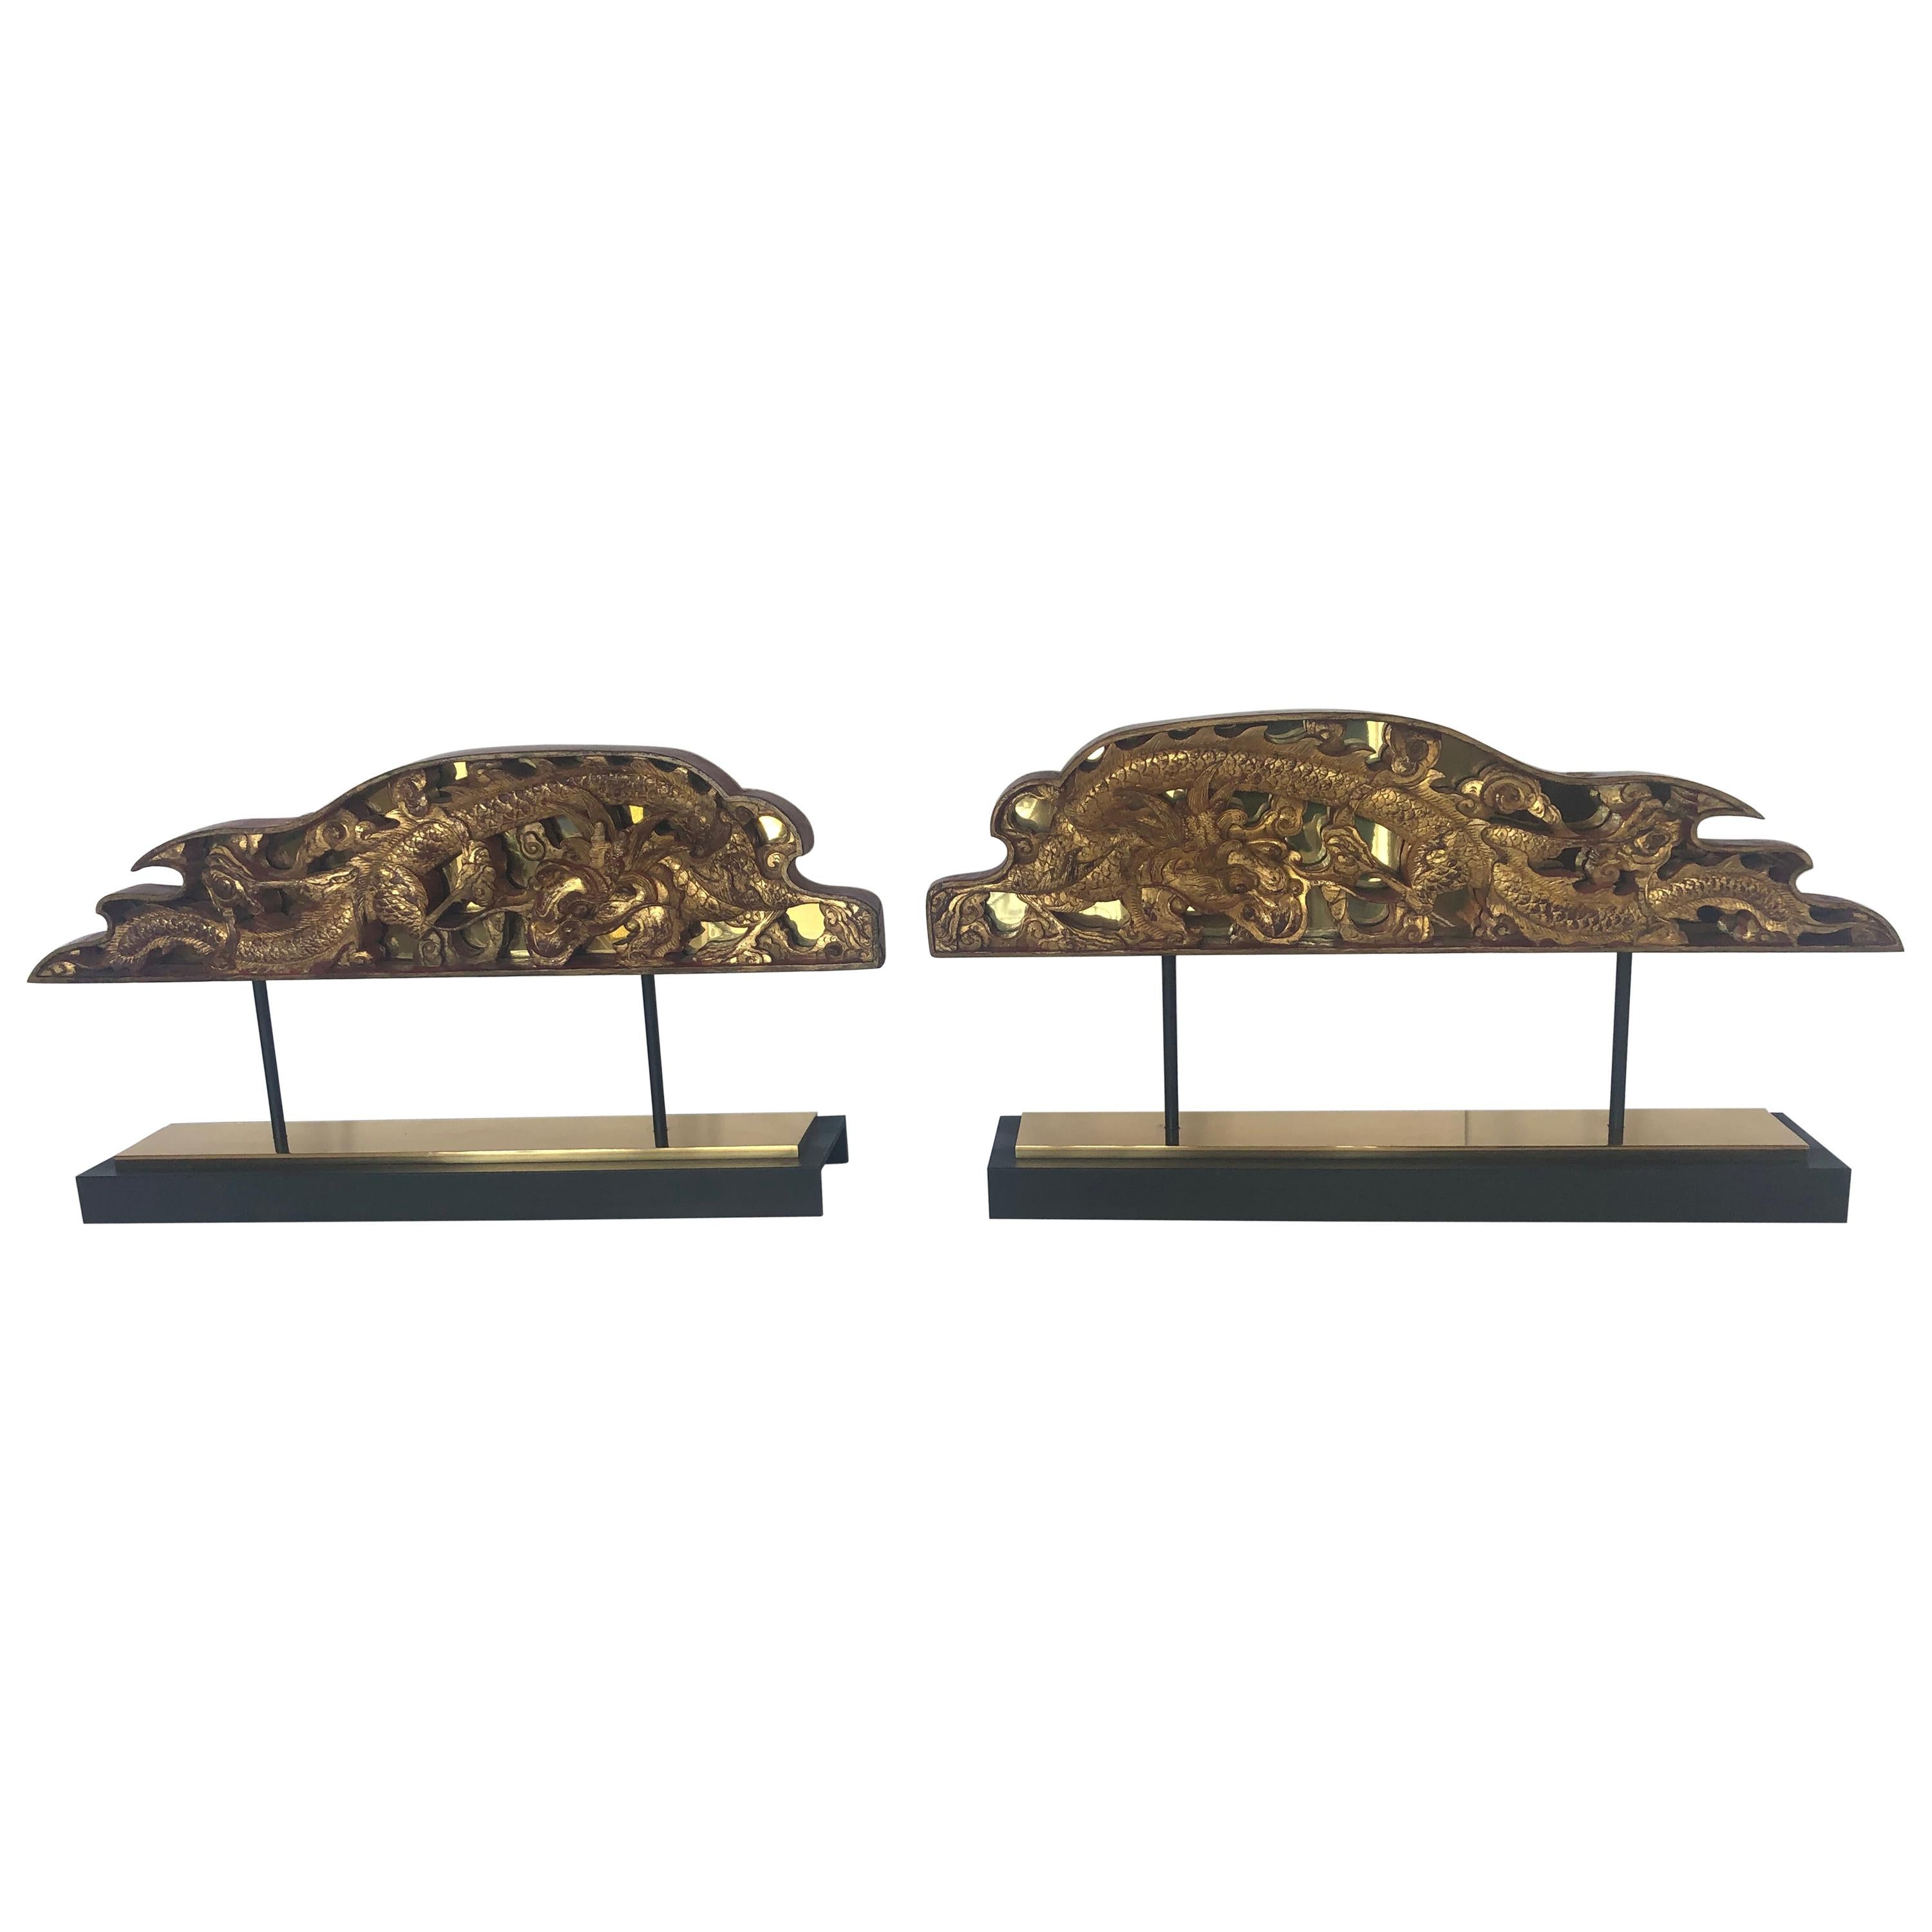 Spectacular Large Pair of Carved Gilded Architectural Fragment Sculptures